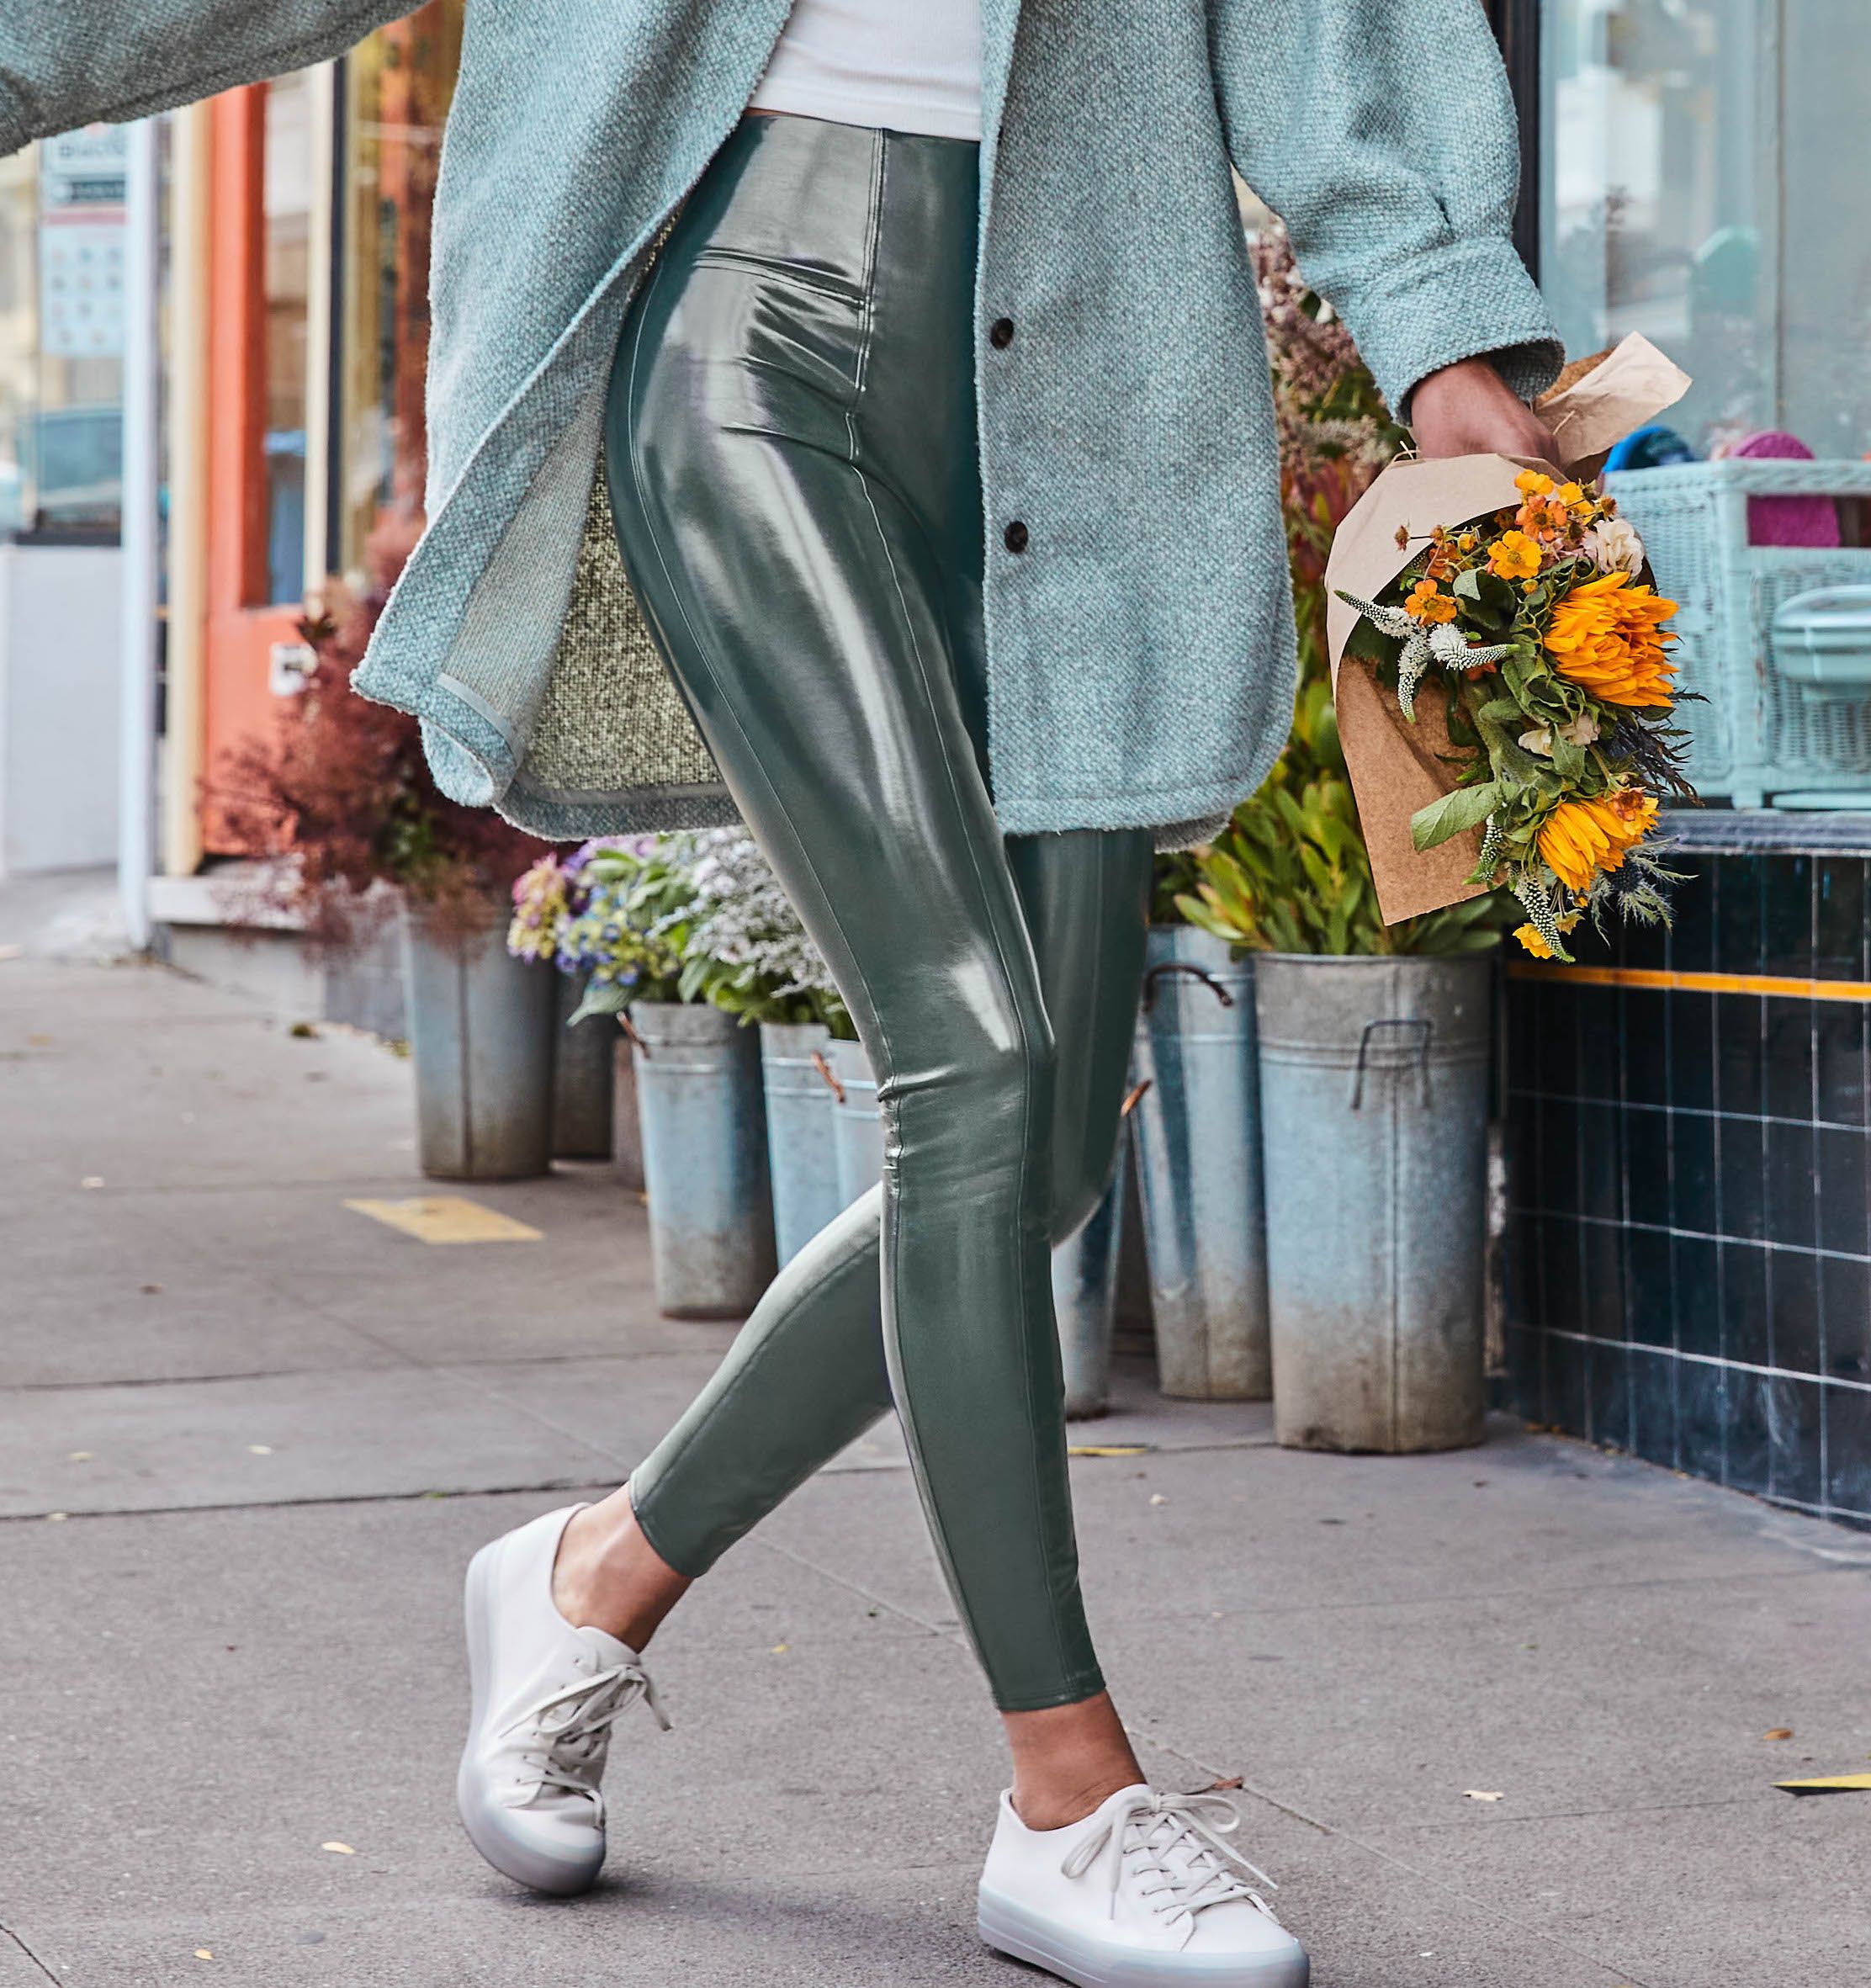 SPANX on X: They're FINALLY here: Faux Patent Leather Leggings in new  jewel tones! Our high-shine faux patent leather legging is a new take on  your favorite leggings - now in ruby